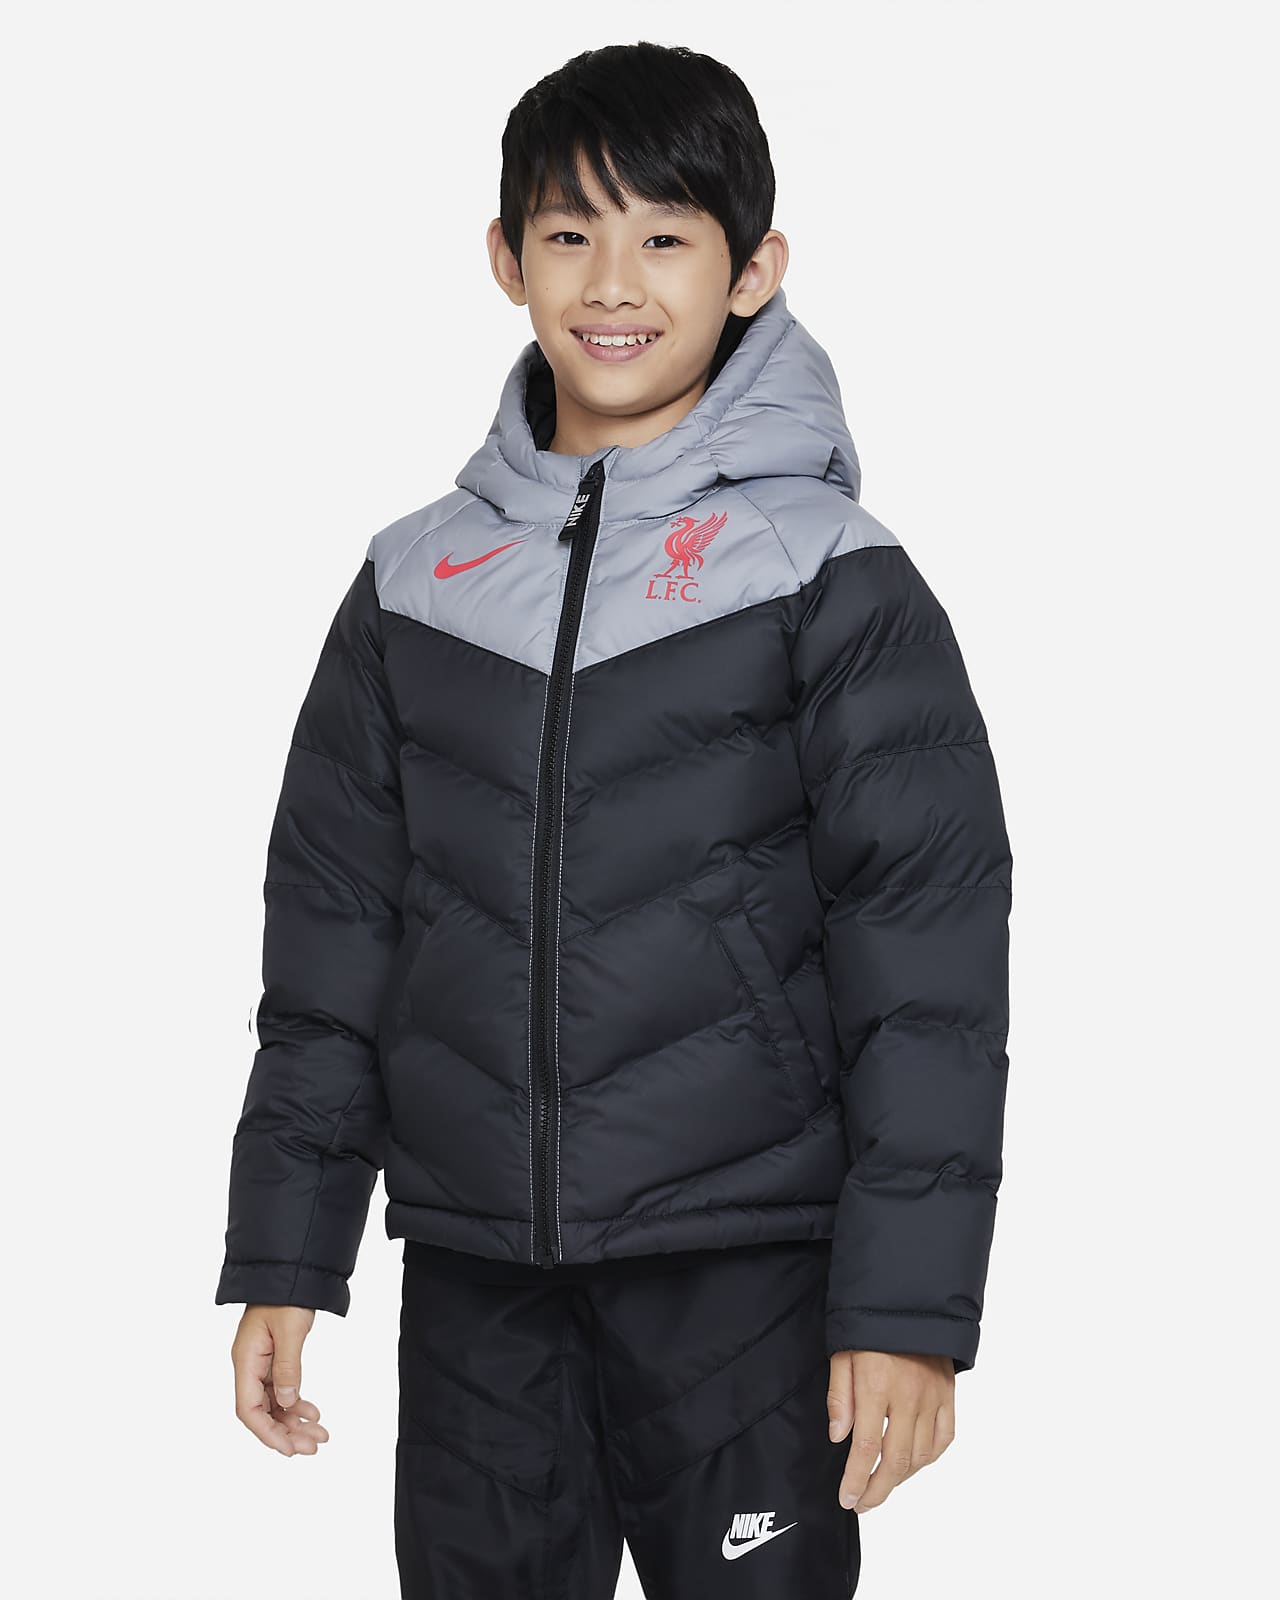 Liverpool F.C. Older Kids' Synthetic-Fill Jacket